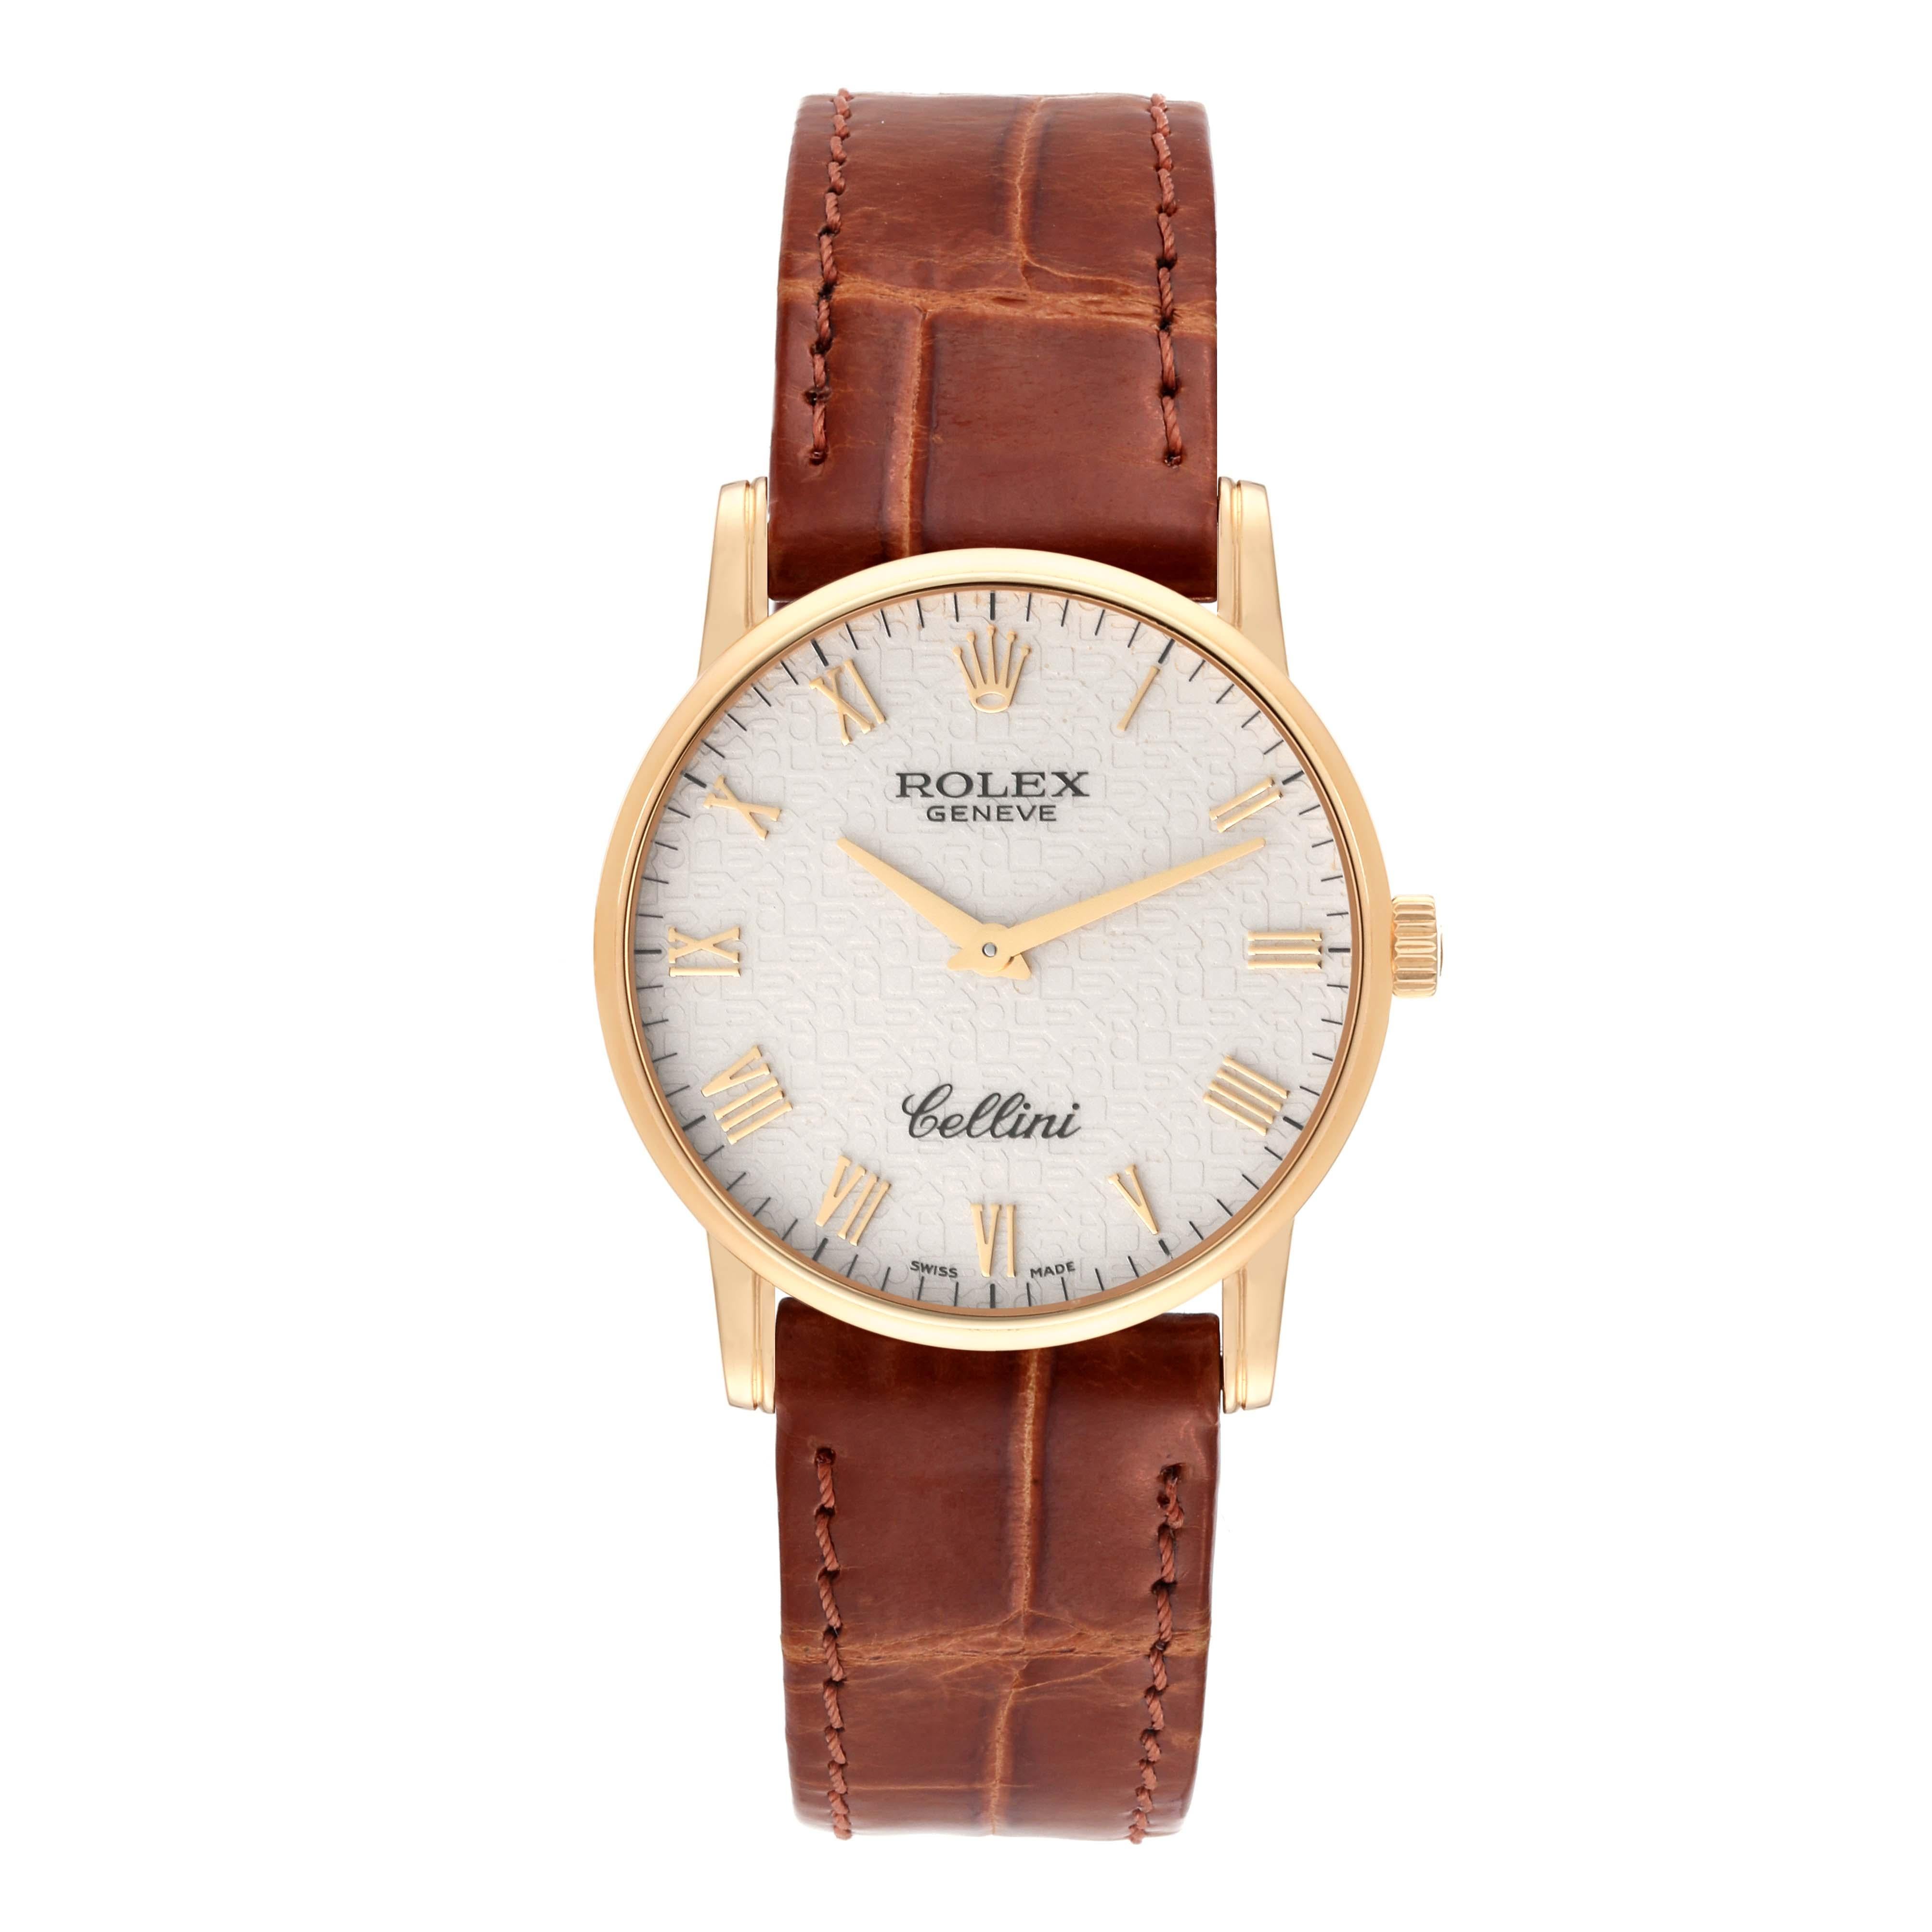 Rolex Cellini Classic Yellow Gold Anniversary Dial Mens Watch 5116. Manual winding movement. 18k yellow gold slim case 31.8 x 5.5 mm in diameter. Rolex logo on the crown. . Scratch resistant sapphire crystal. Flat profile. Ivory jubilee anniversary